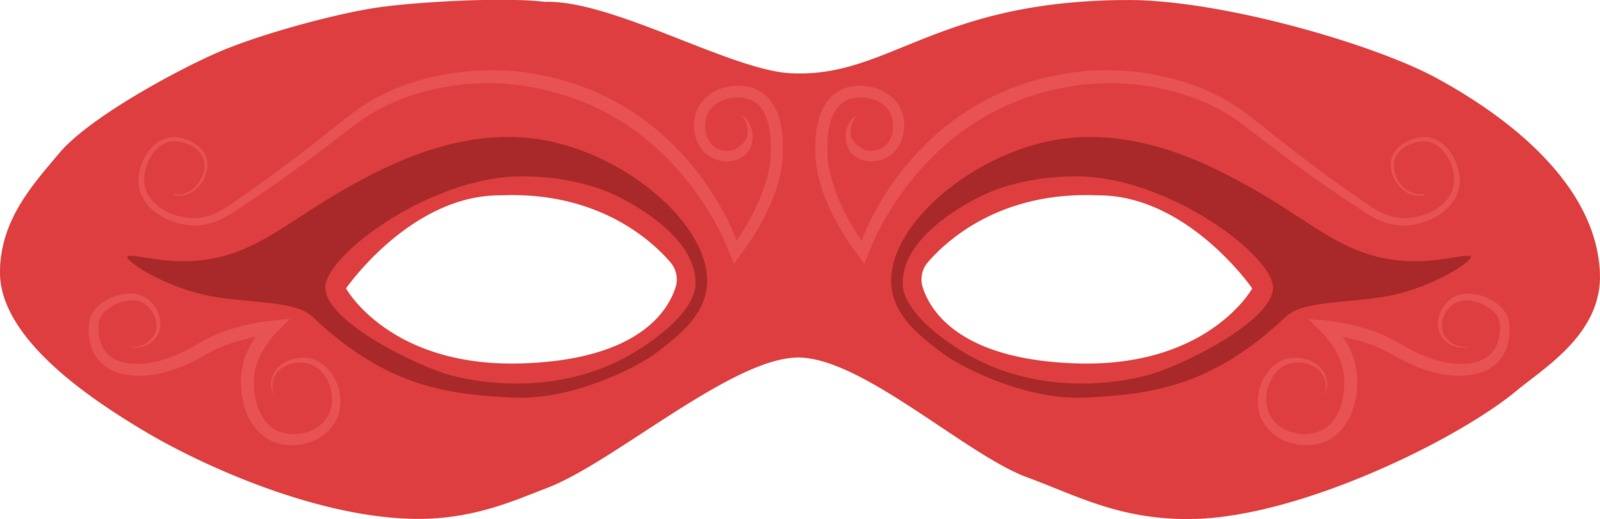 Carnival mask flat design icon by wavemovies